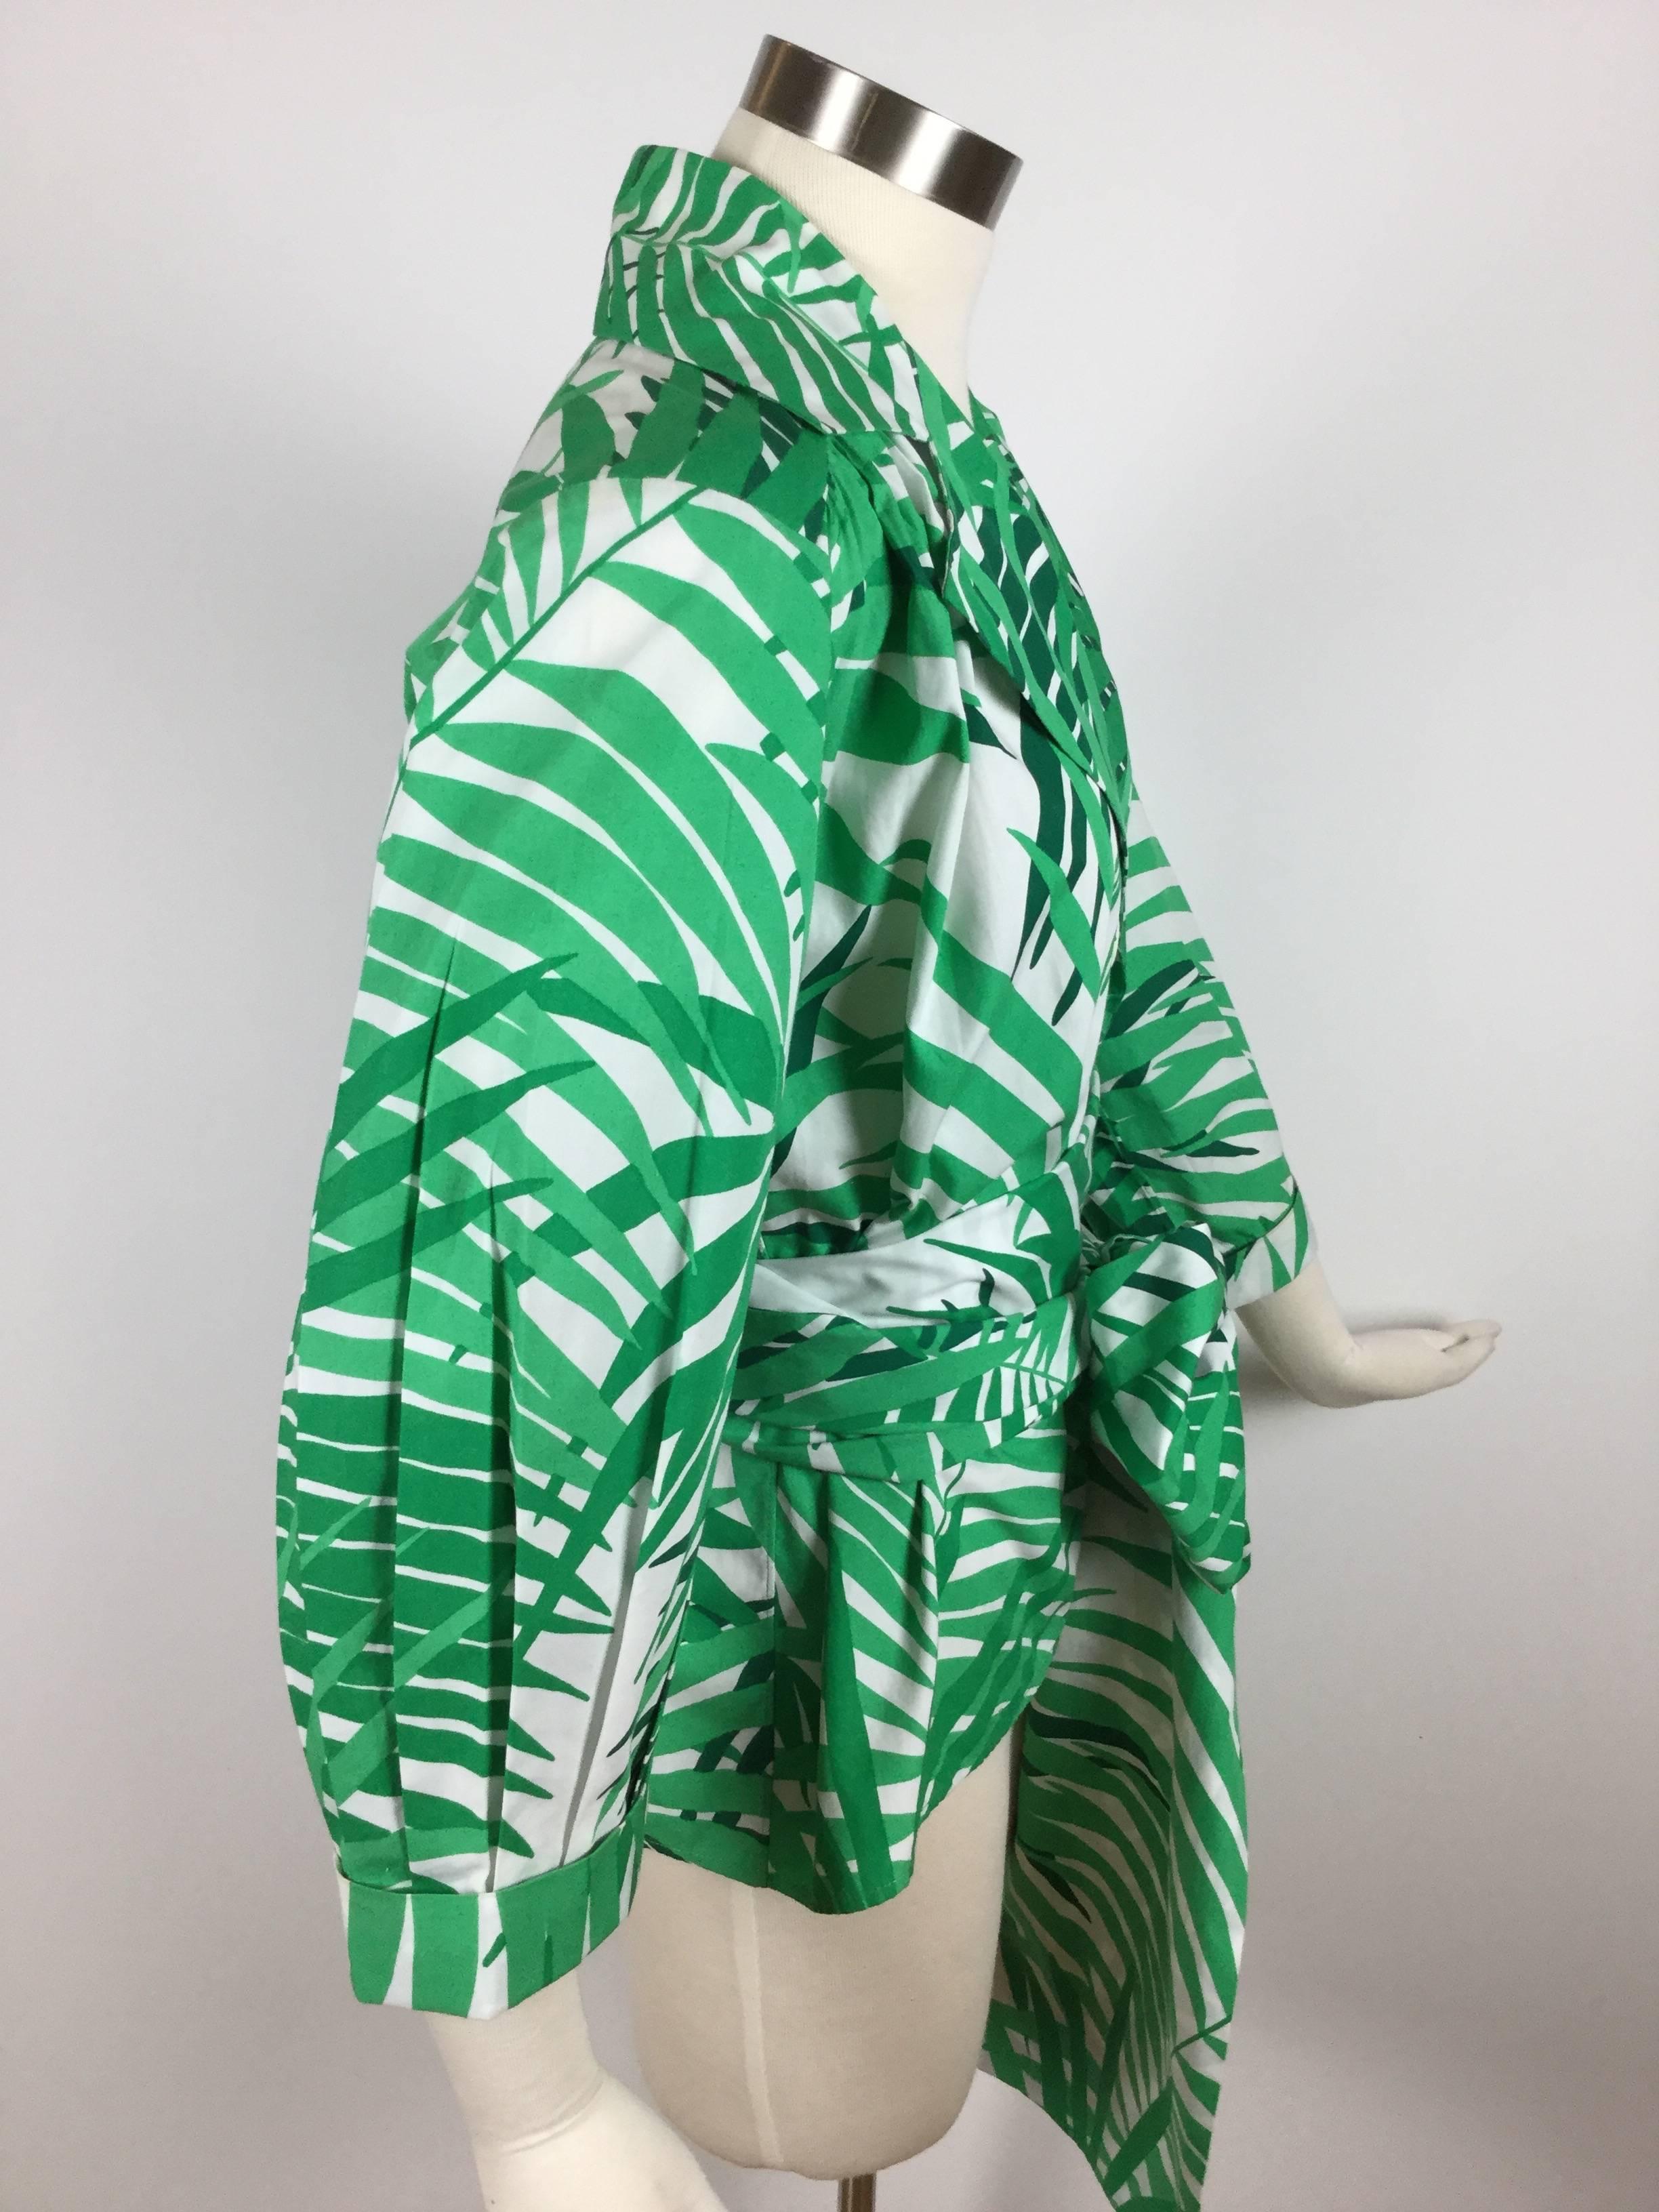 This is such a striking piece from Yves Saint Laurent!  Polished cotton jacket style wrap top with a gorgeous palm print. Sharp wide lapels. Comes with an incredible matching Obi belt that measures 11 FEET by 9 inches!  So bold and eye catching!